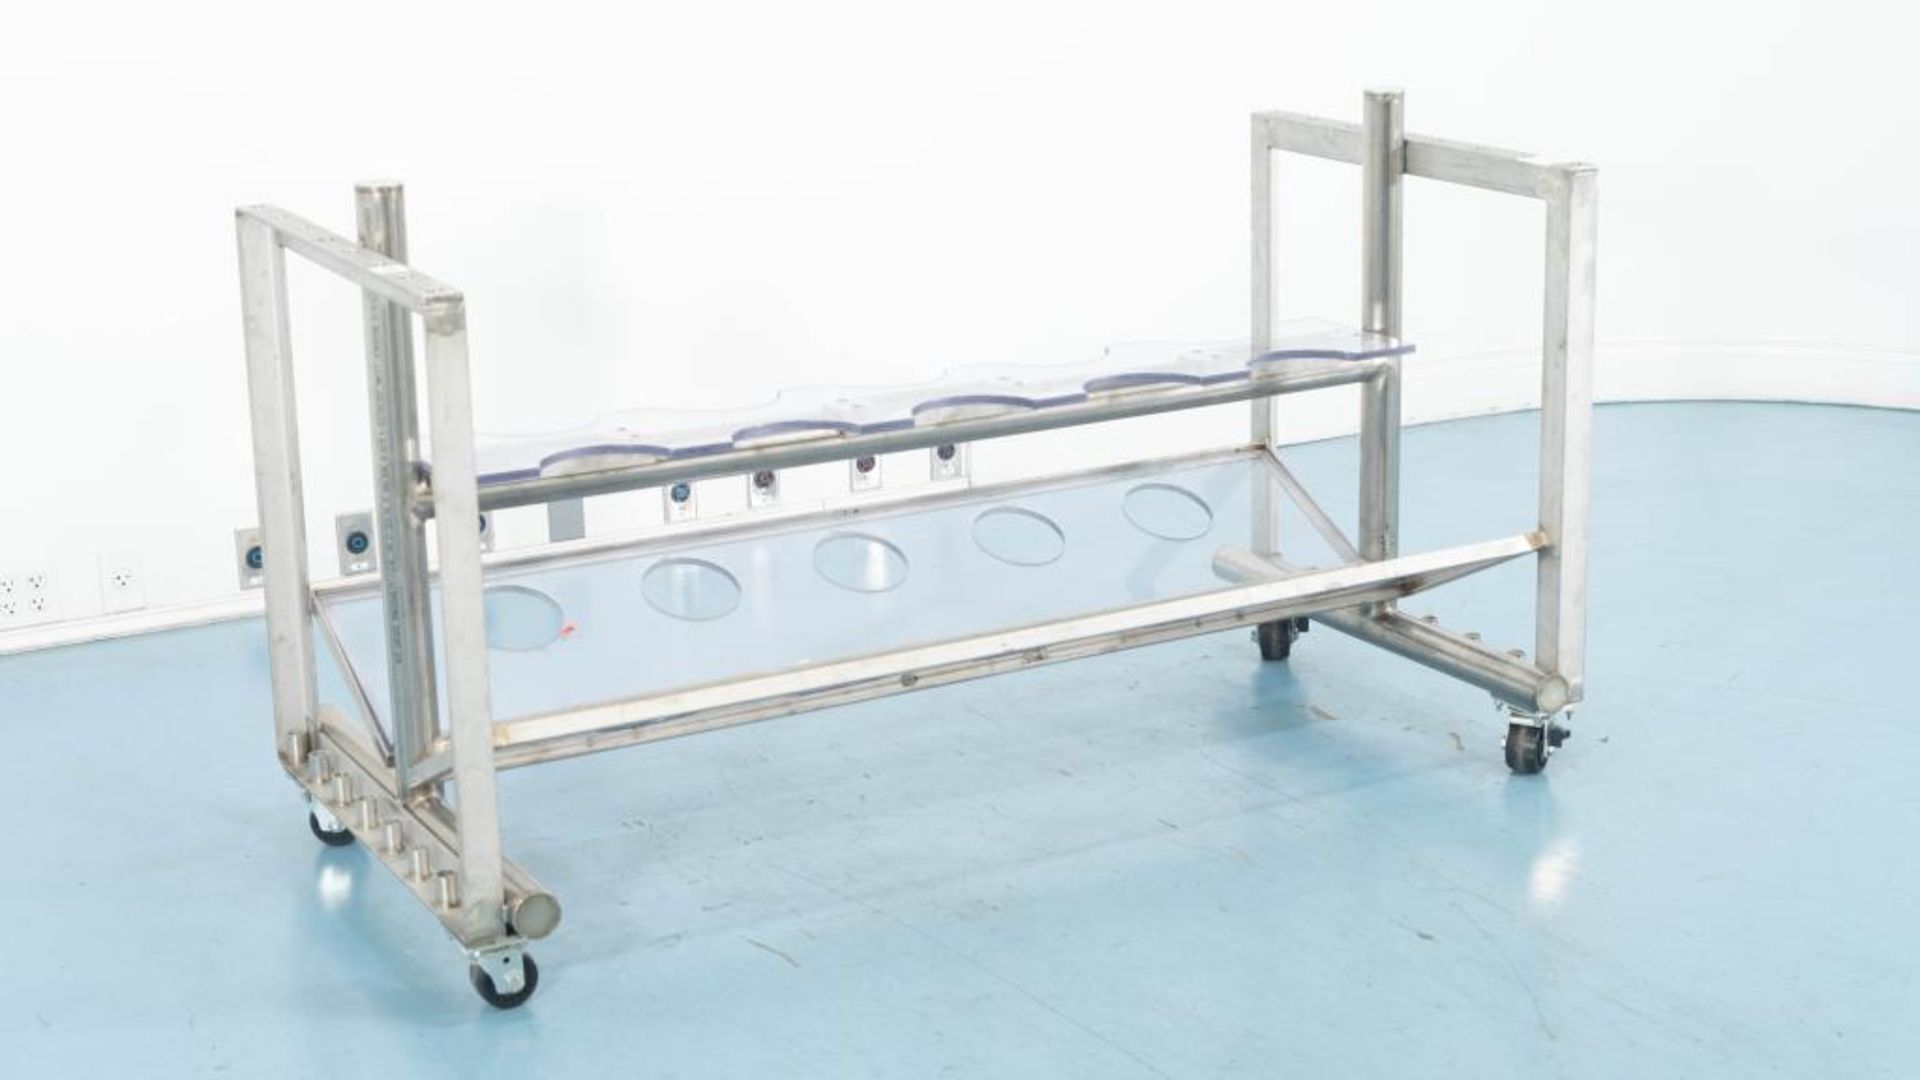 Steel Rack for Motor Storage and Transport - Image 3 of 6